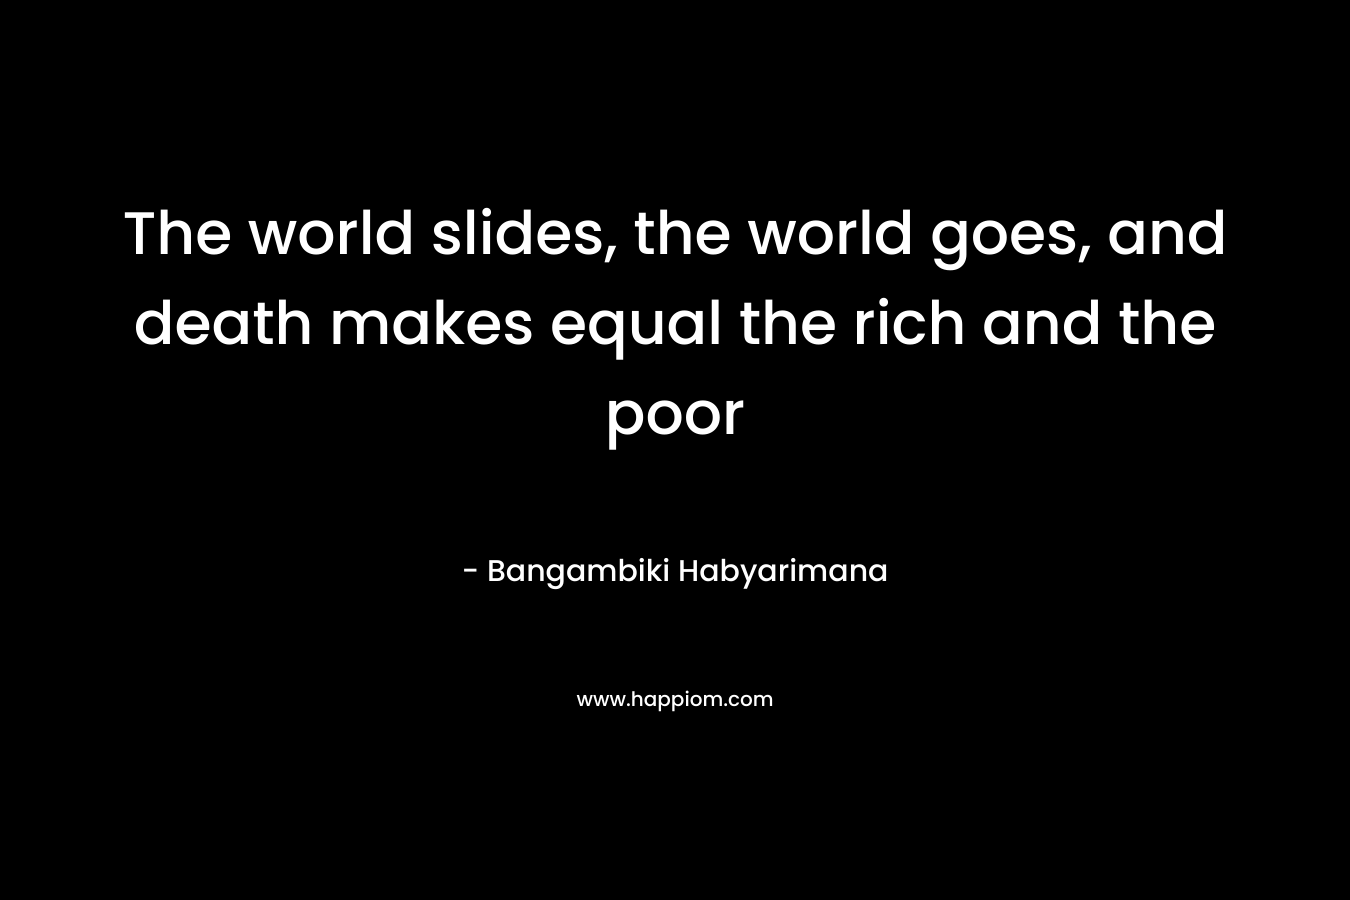 The world slides, the world goes, and death makes equal the rich and the poor